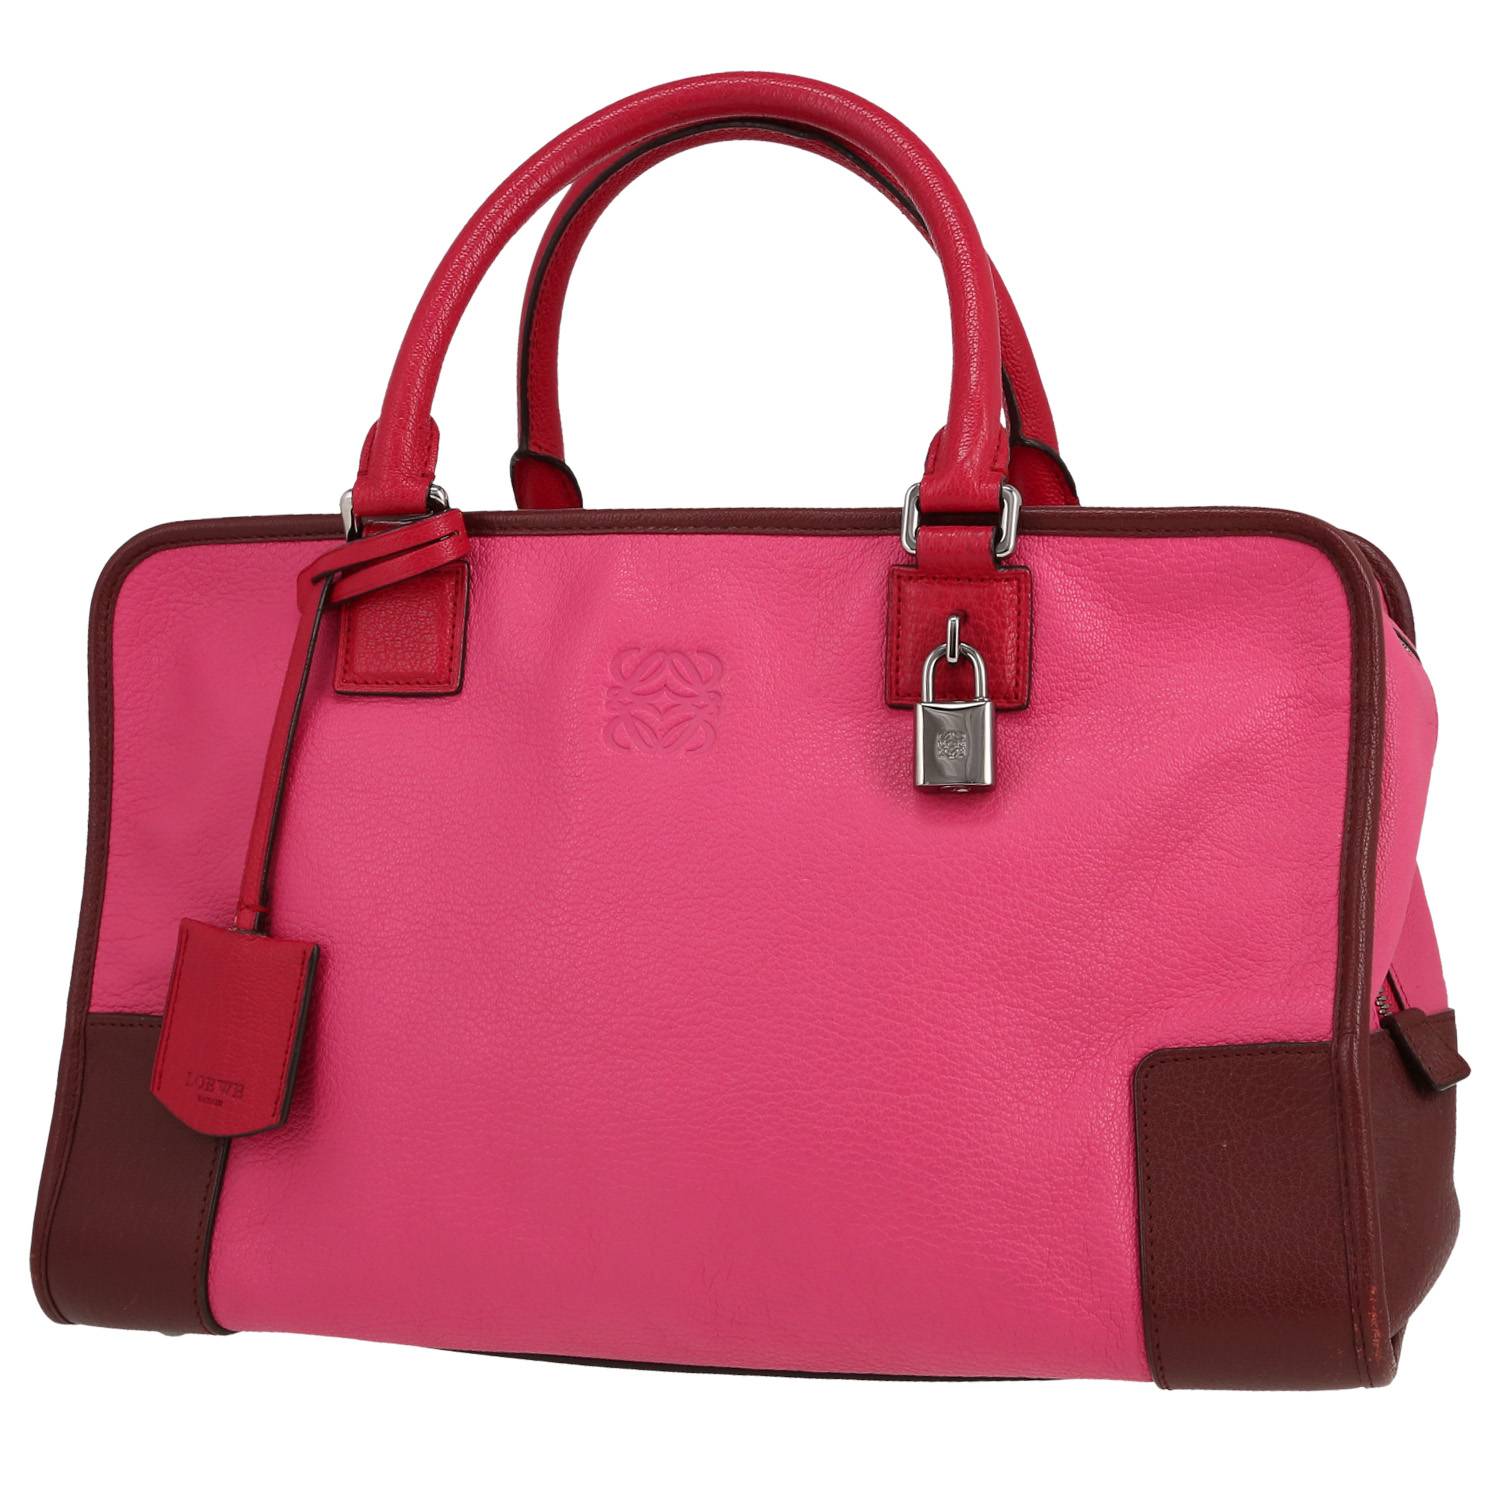 Amazona Handbag In Pink, And Tricolor Leather